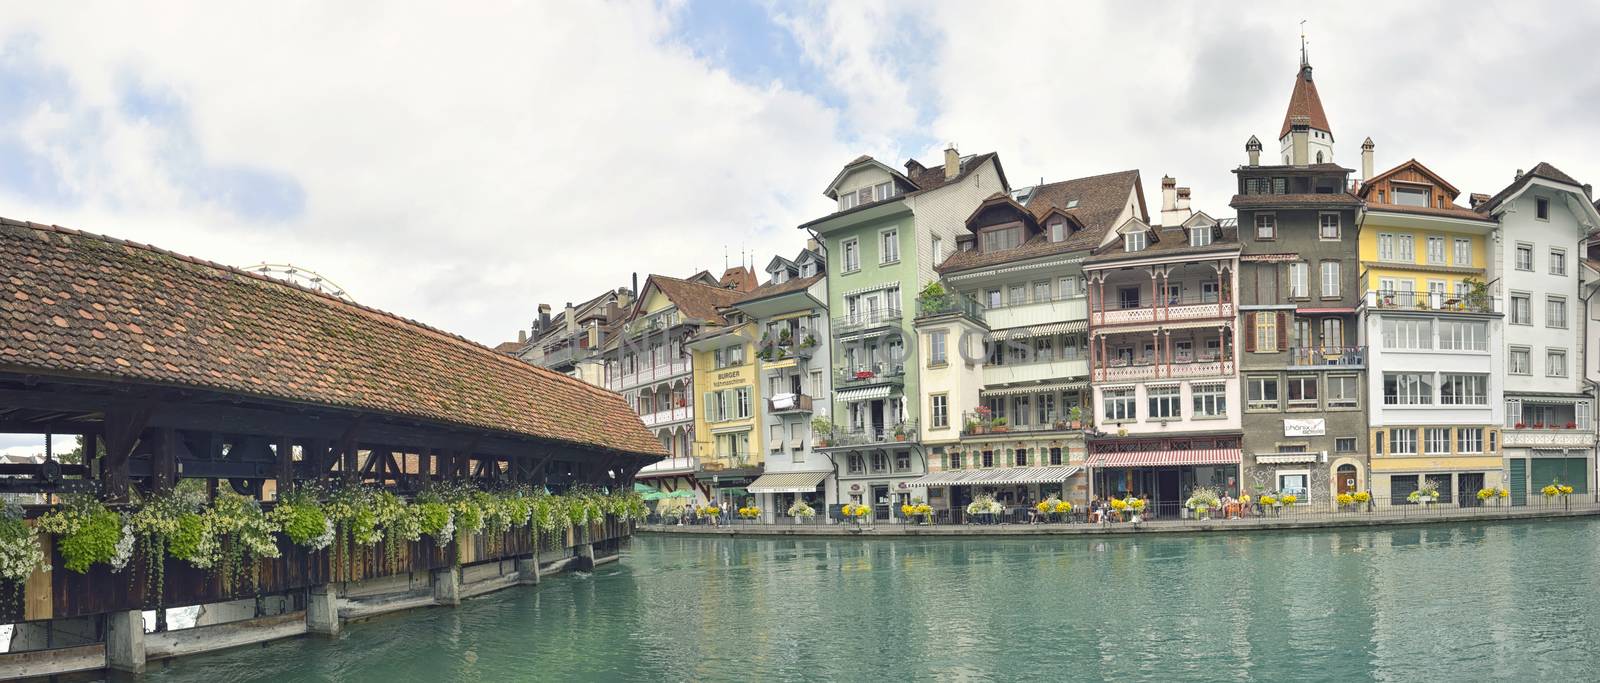 Thun city and river in Aare, Switzerland  by mady70